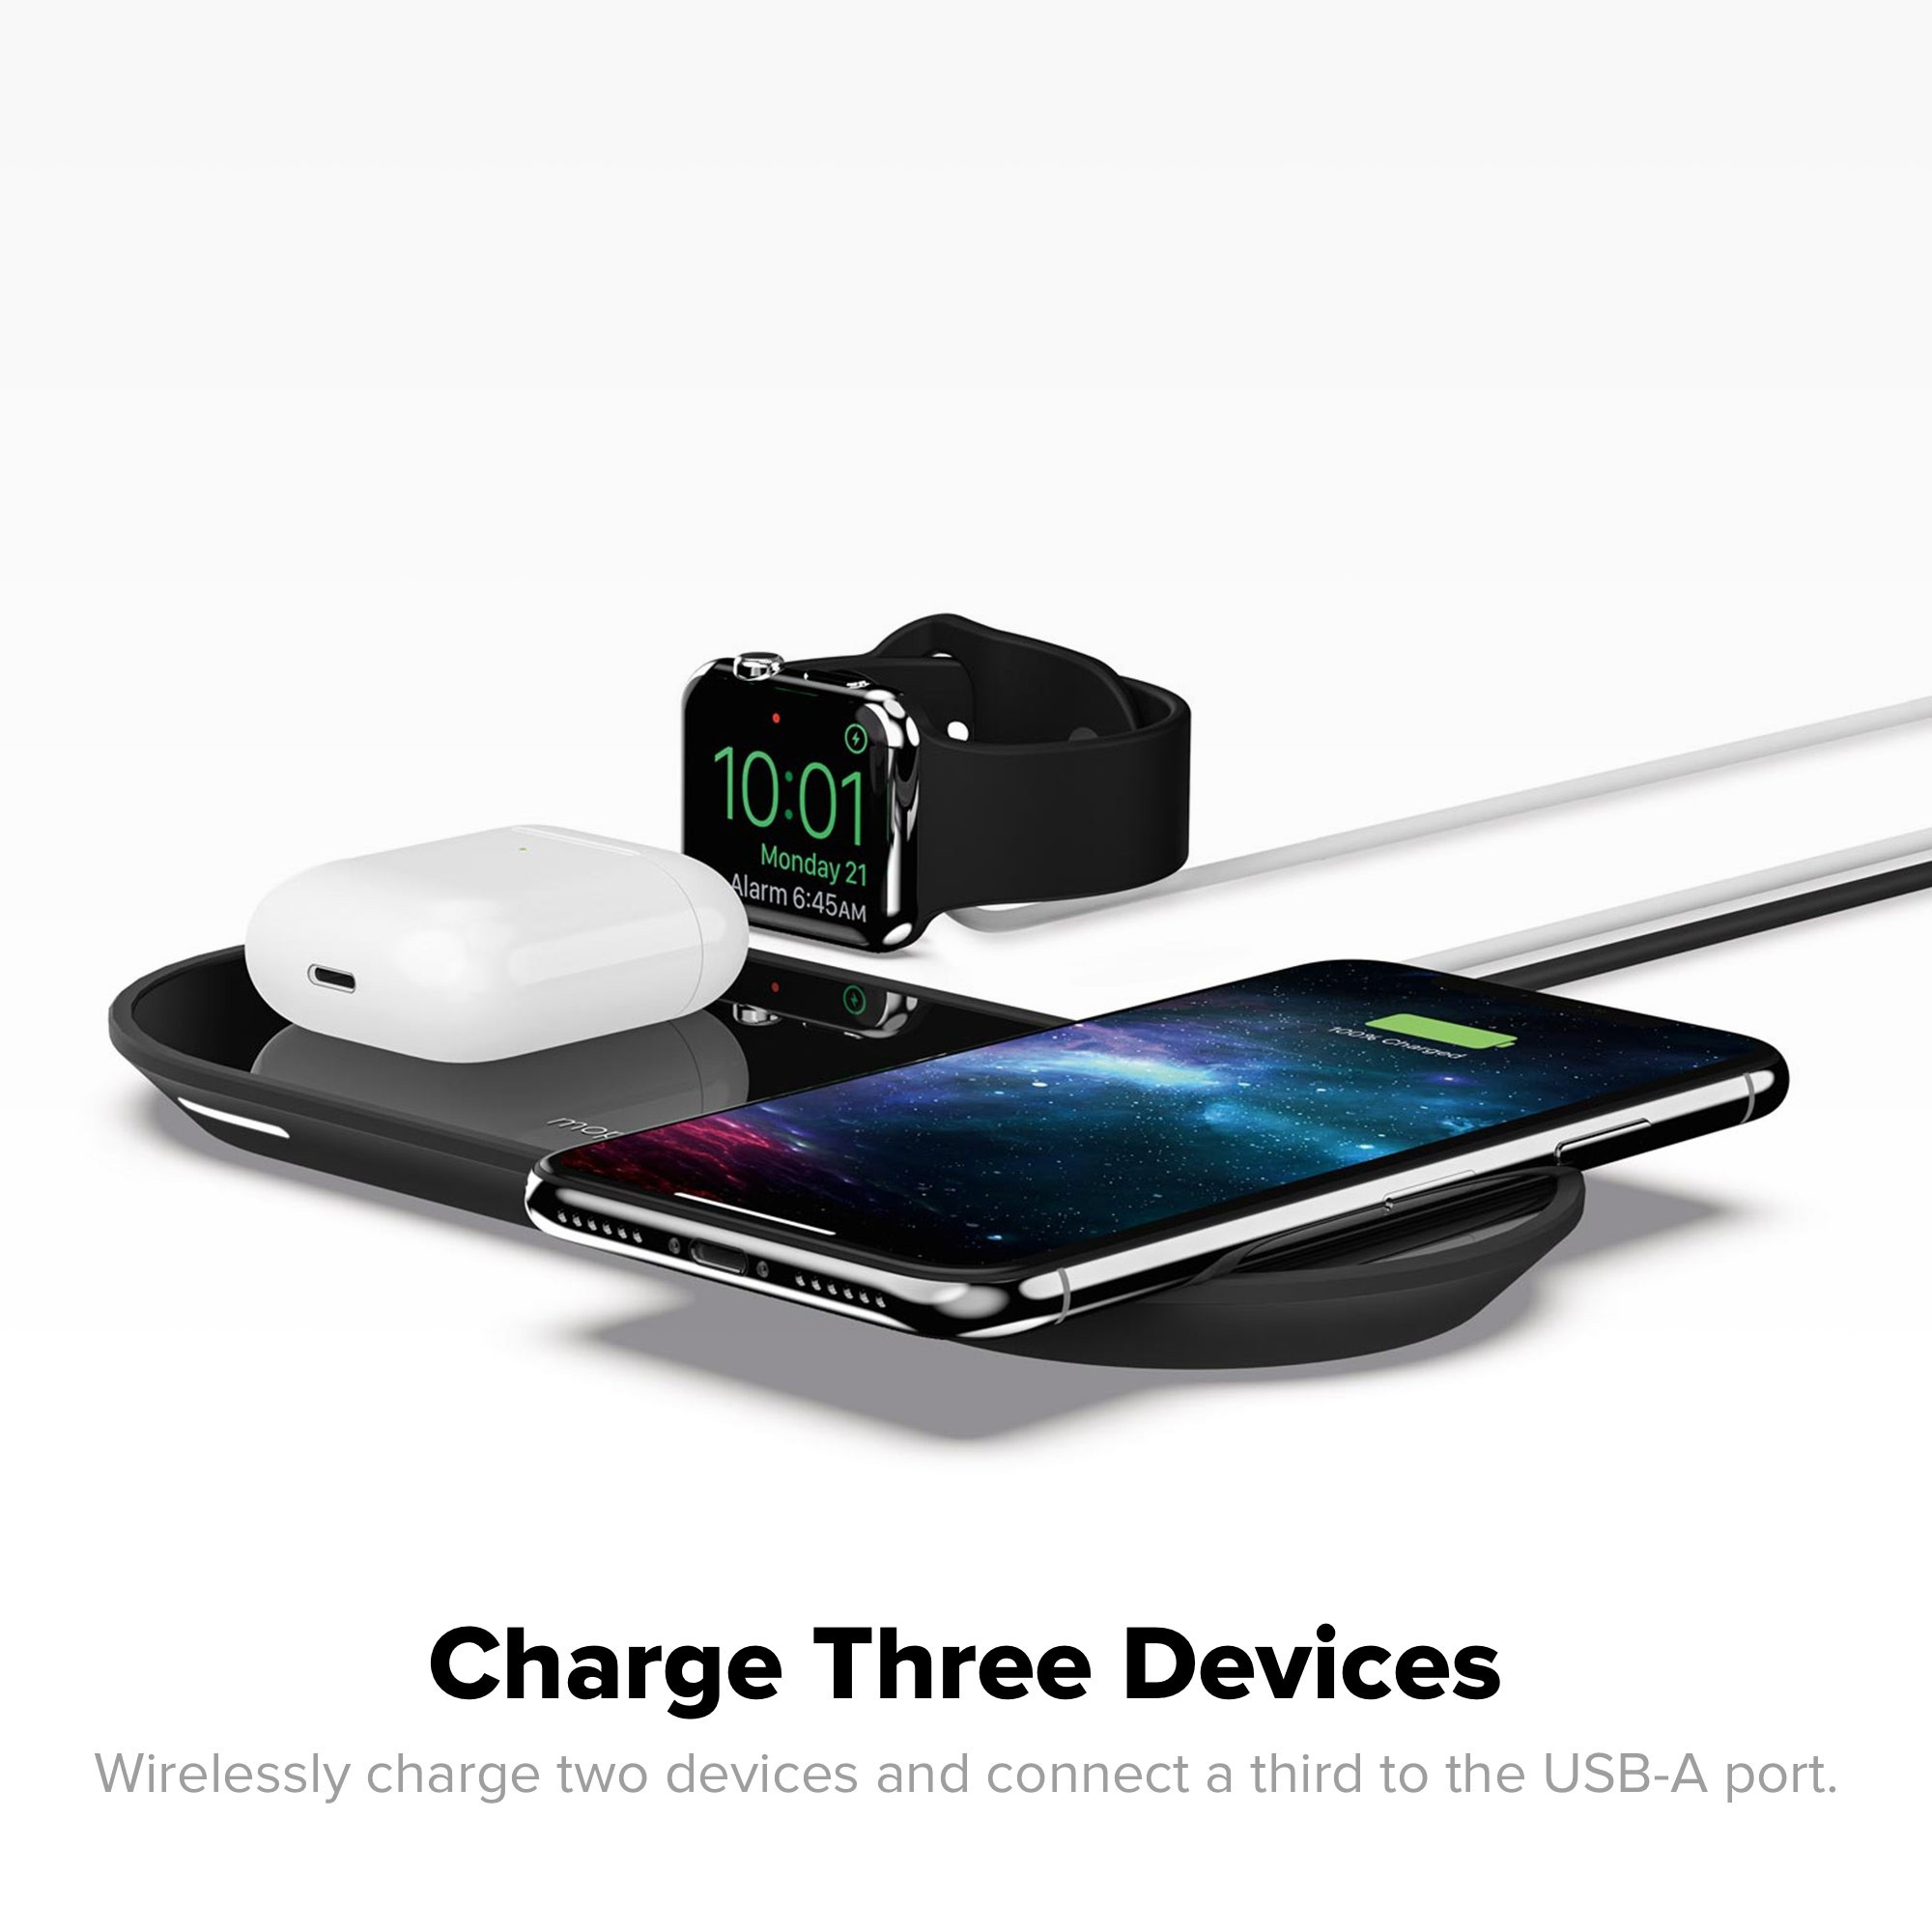 Mophie's New Multi-Device Wireless Charging Mats and Car Chargers Now Available From Online Apple Store